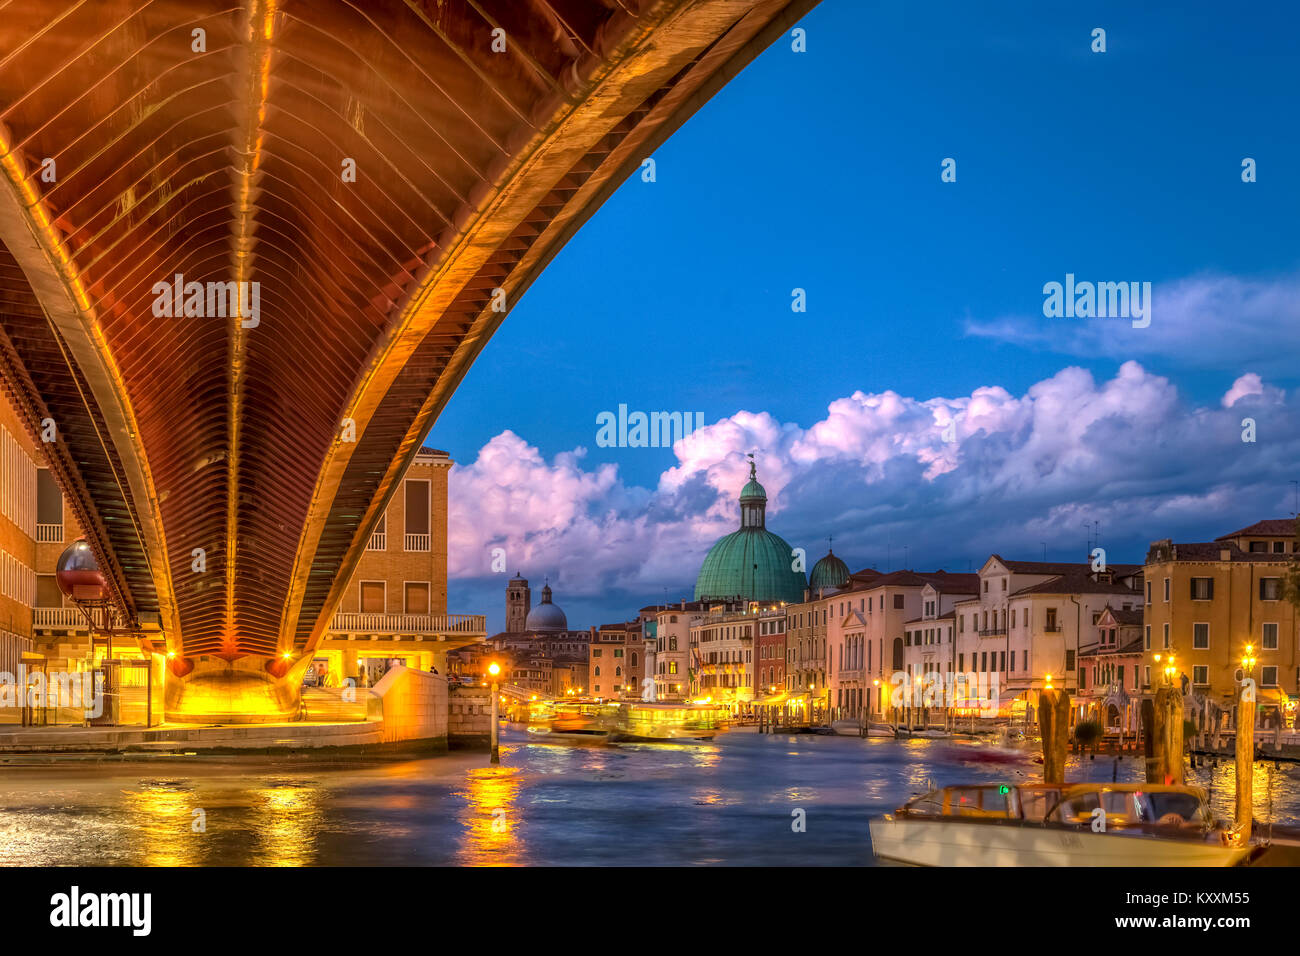 The Grand Canal and pedestrian bridge at Piazzale Roma at night in Veneto, Venice, Italy, Europe. Stock Photo